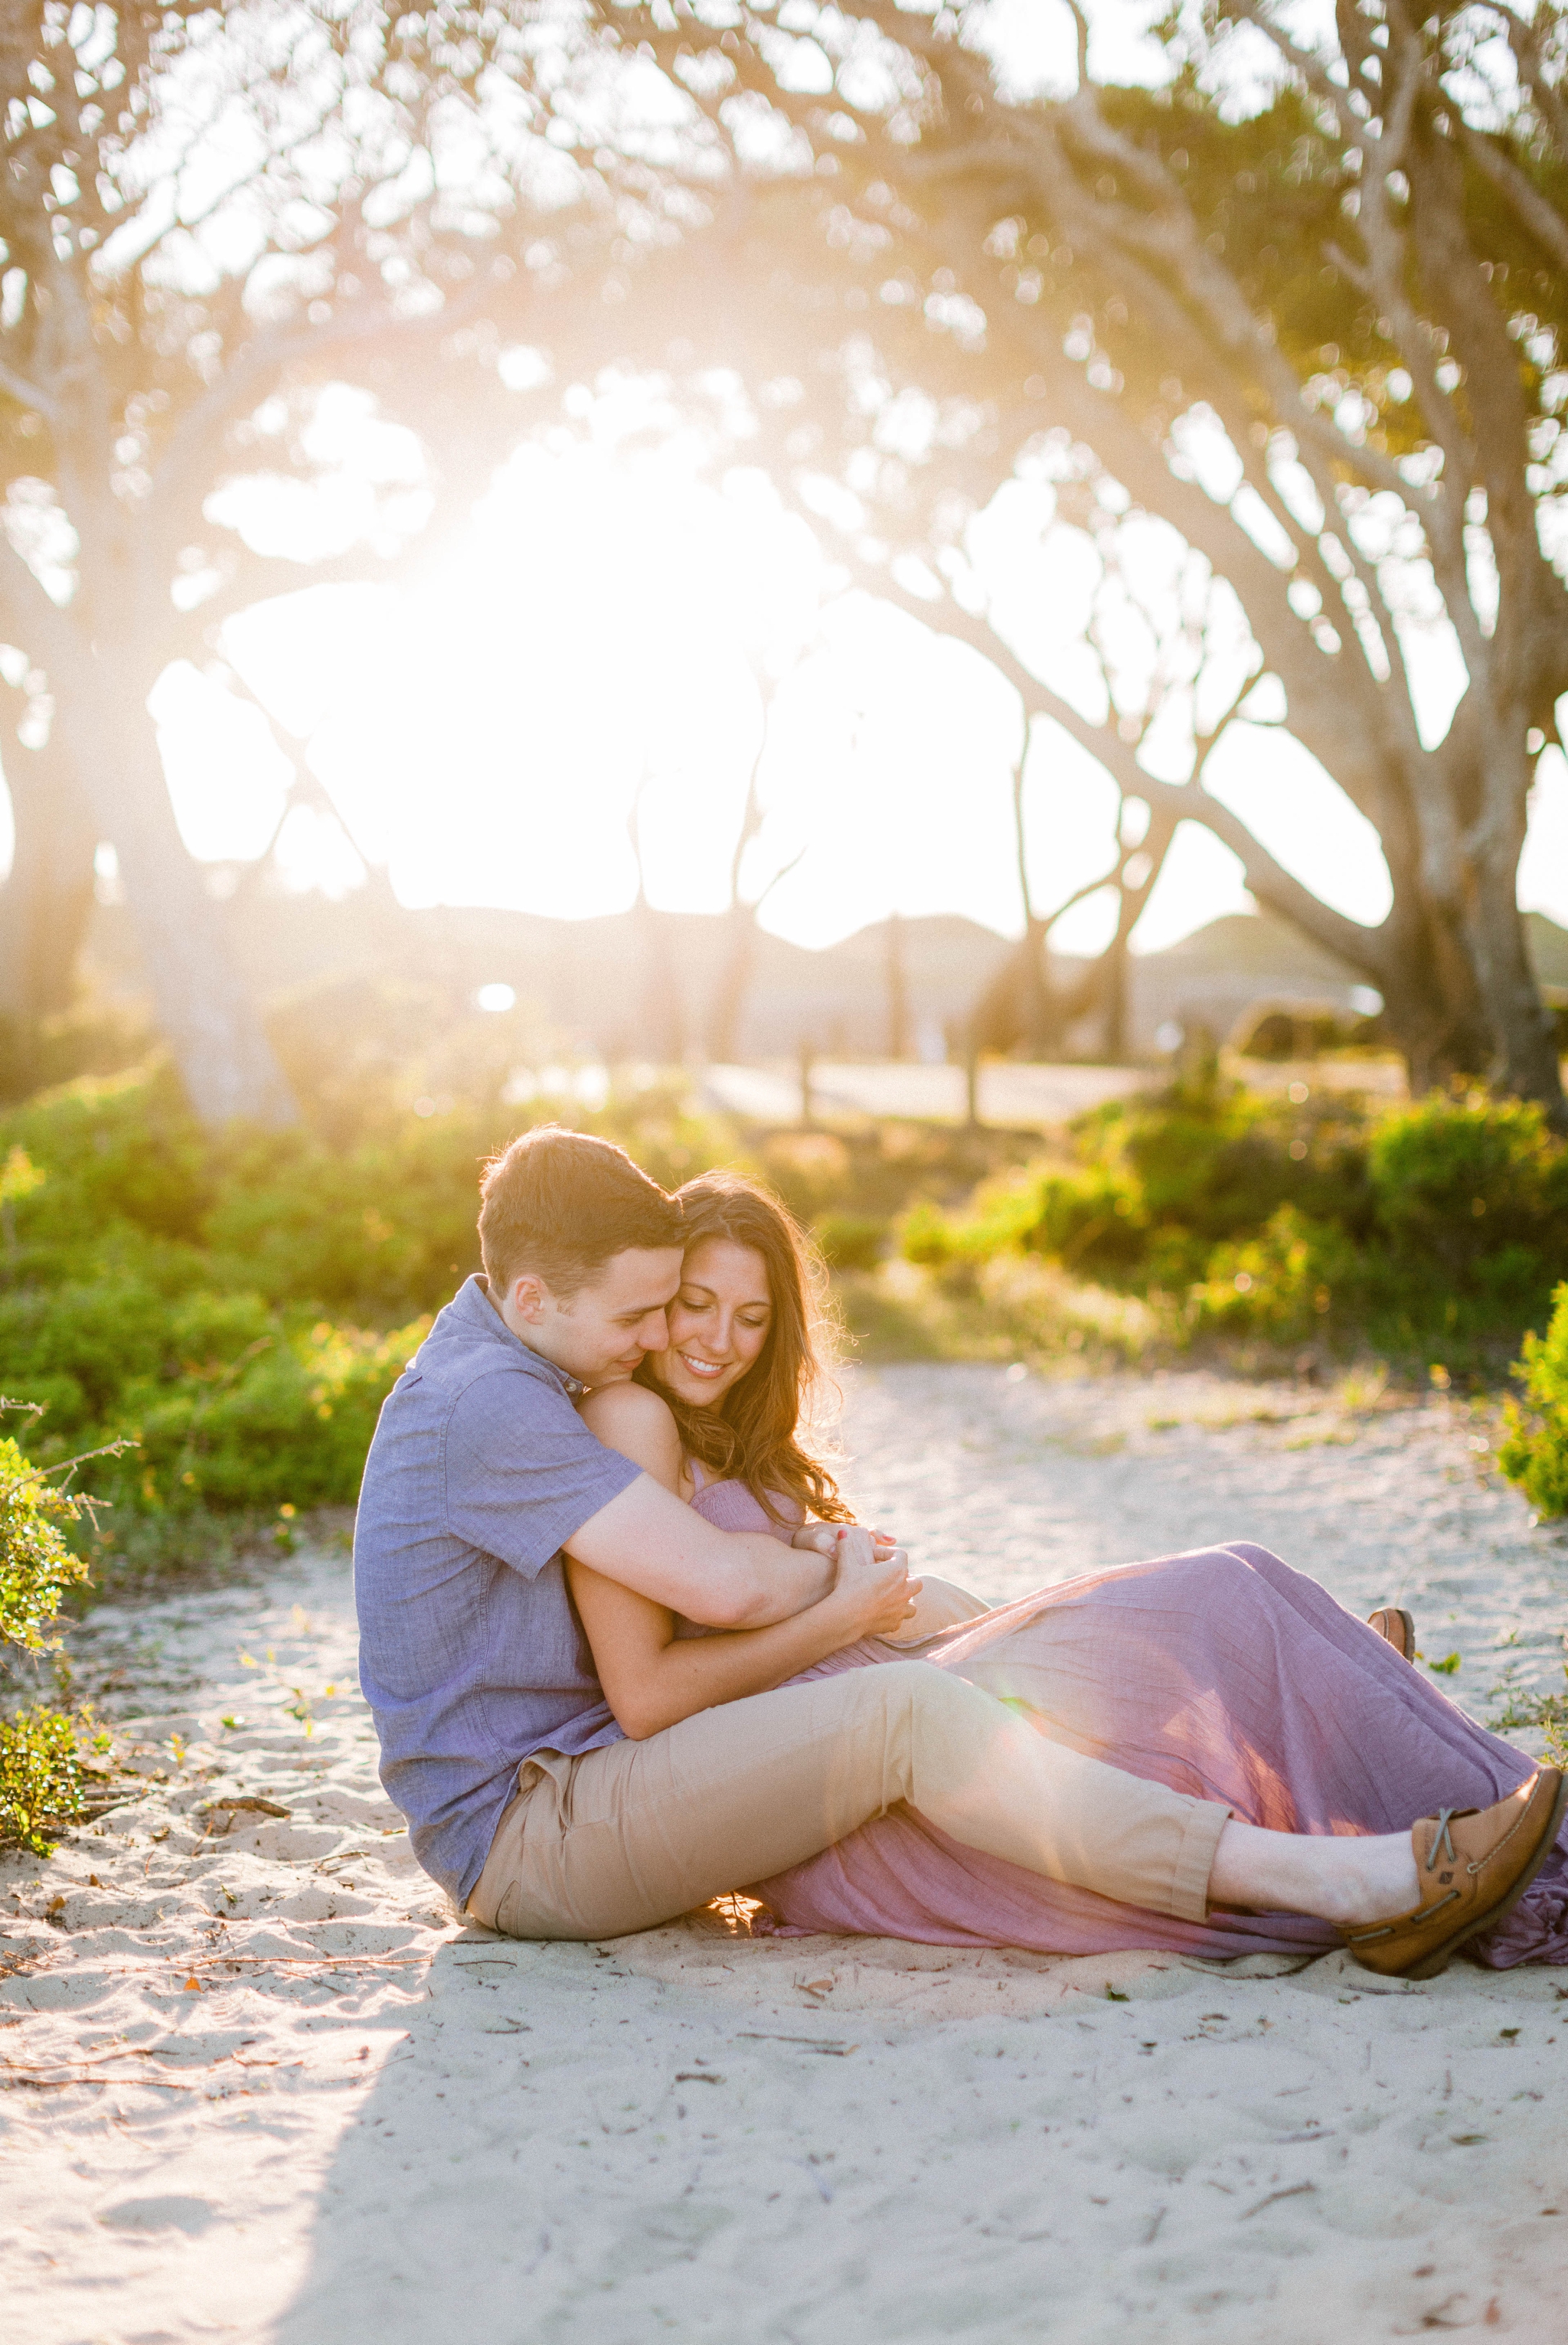  couple giggeling on the beach in front of live oak trees with the sunset behind them - Woman is in a flowy pastel maxi dress - outdoor golden light session - engagement photographer in honolulu, oahu, hawaii - johanna dye photography 